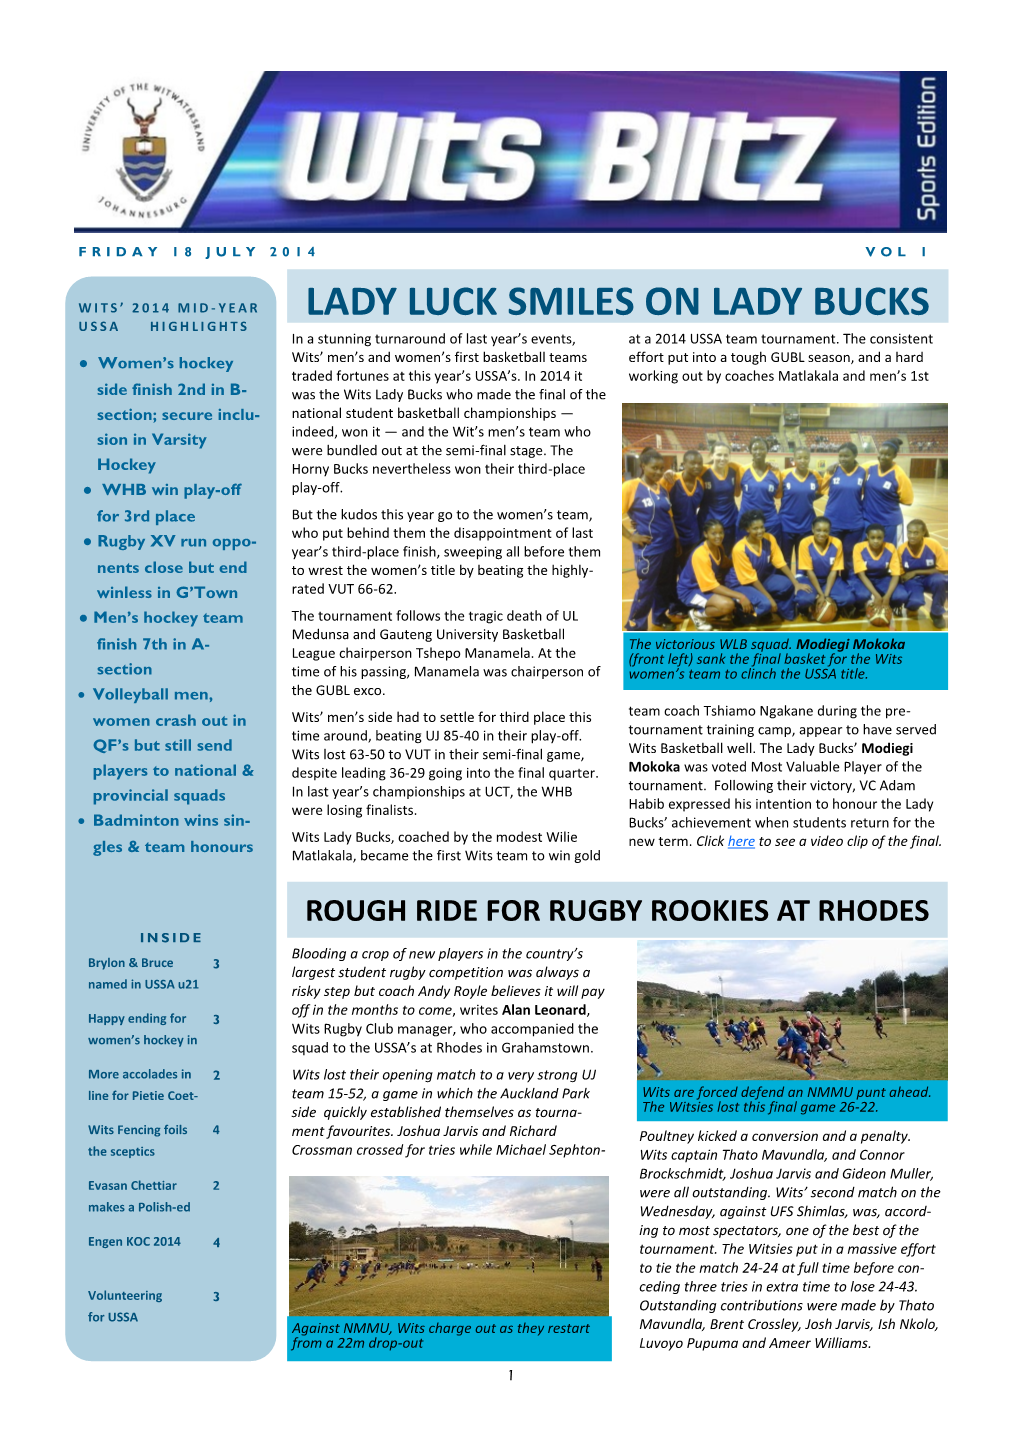 LADY LUCK SMILES on LADY BUCKS USSA HIGHLIGHTS in a Stunning Turnaround of Last Year’S Events, at a 2014 USSA Team Tournament